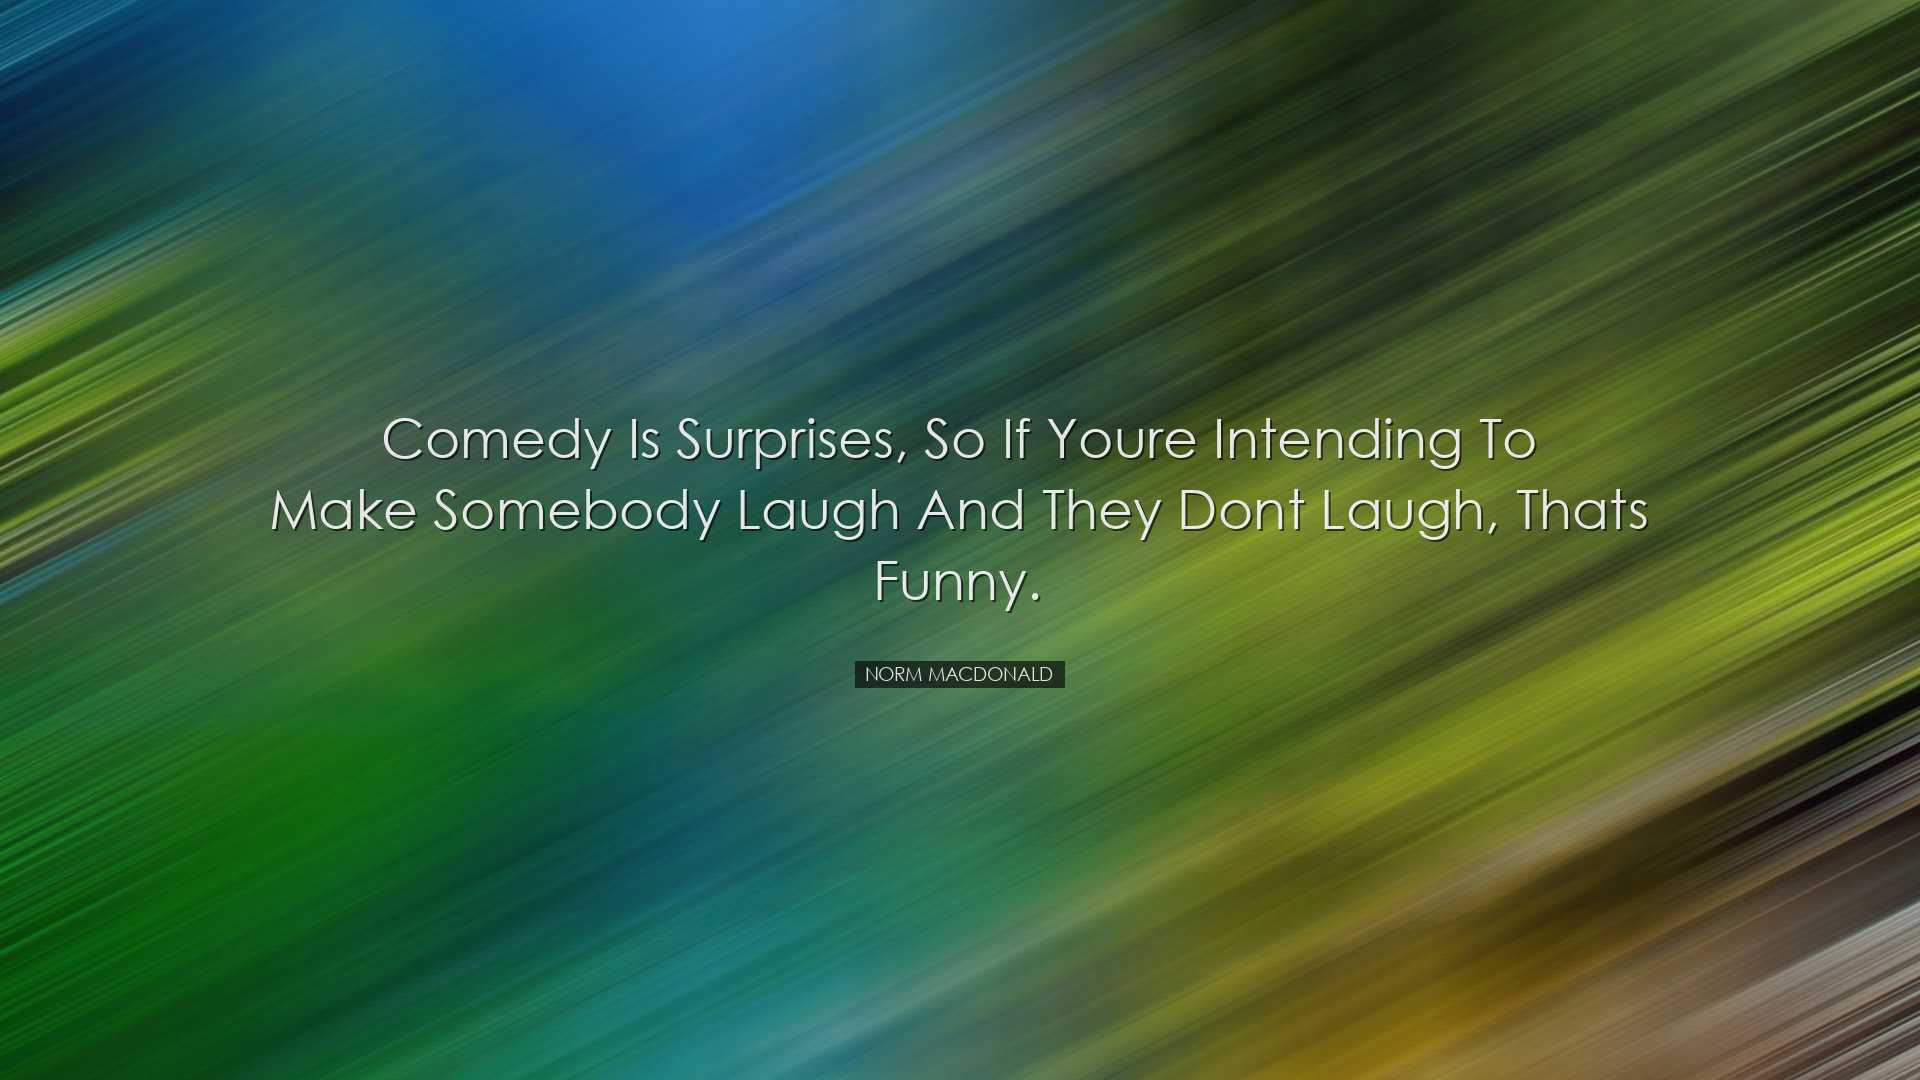 Comedy is surprises, so if youre intending to make somebody laugh